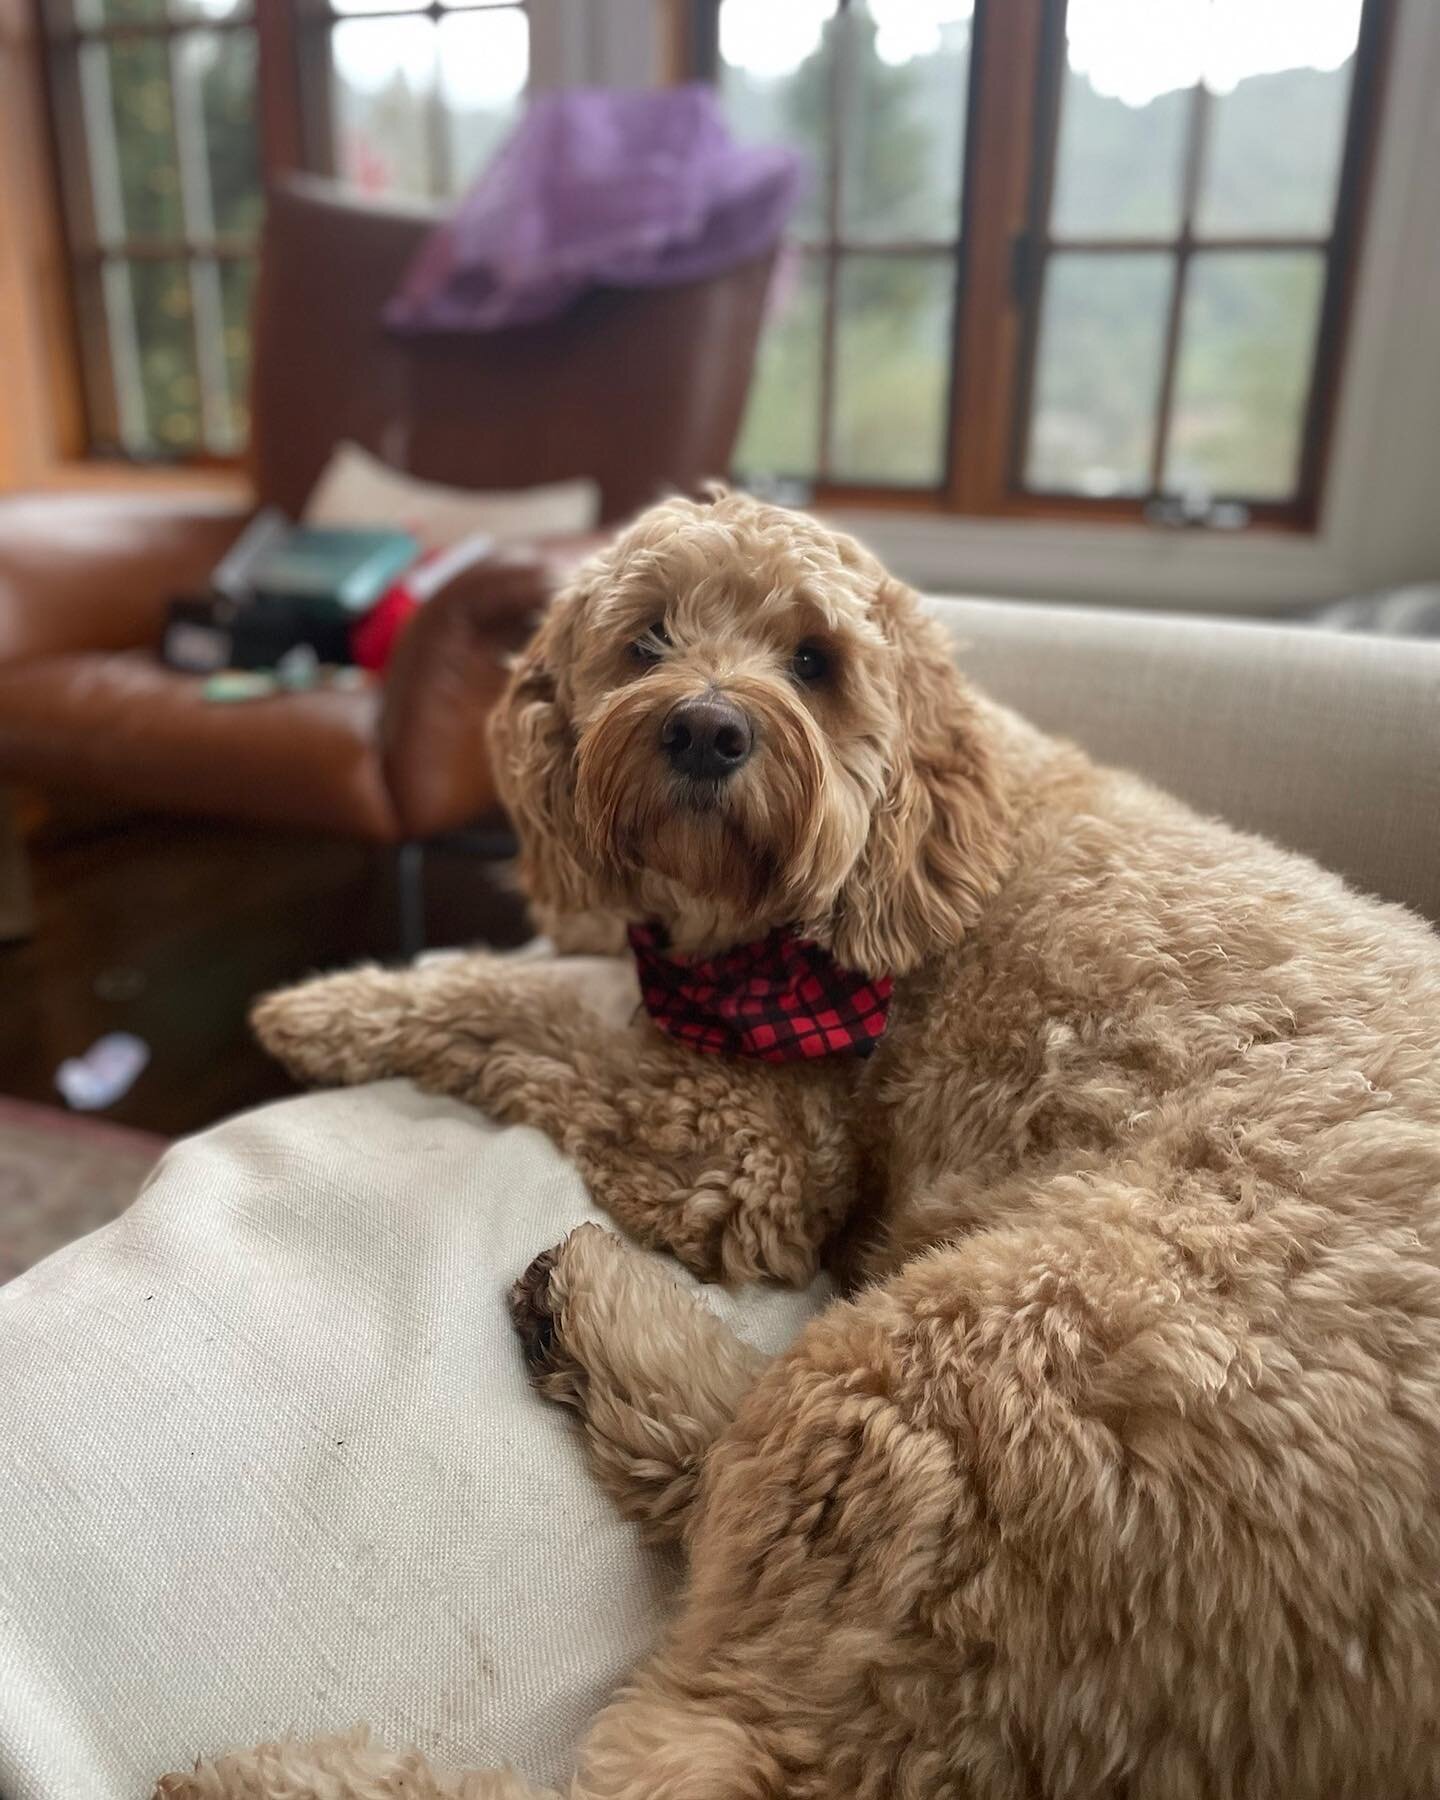 2022 is off to a cozy start✨ #winecountrygoldendoodles #wcgd